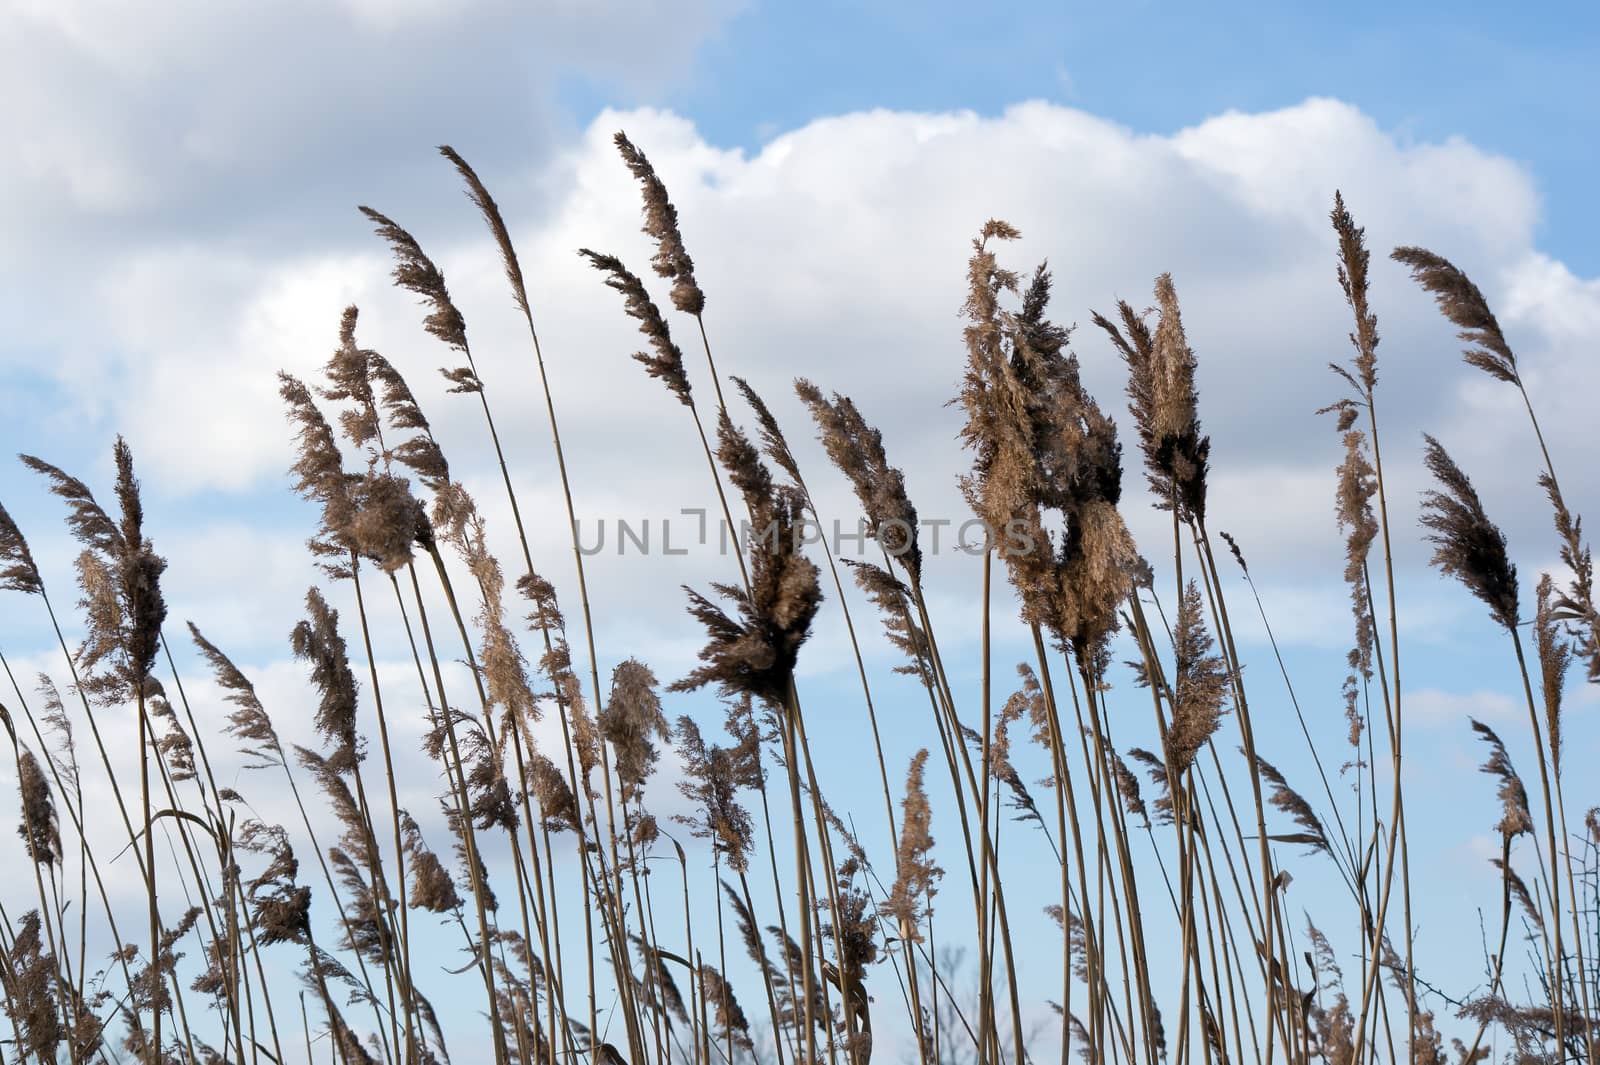 The dry reeds and clouds on a lake.